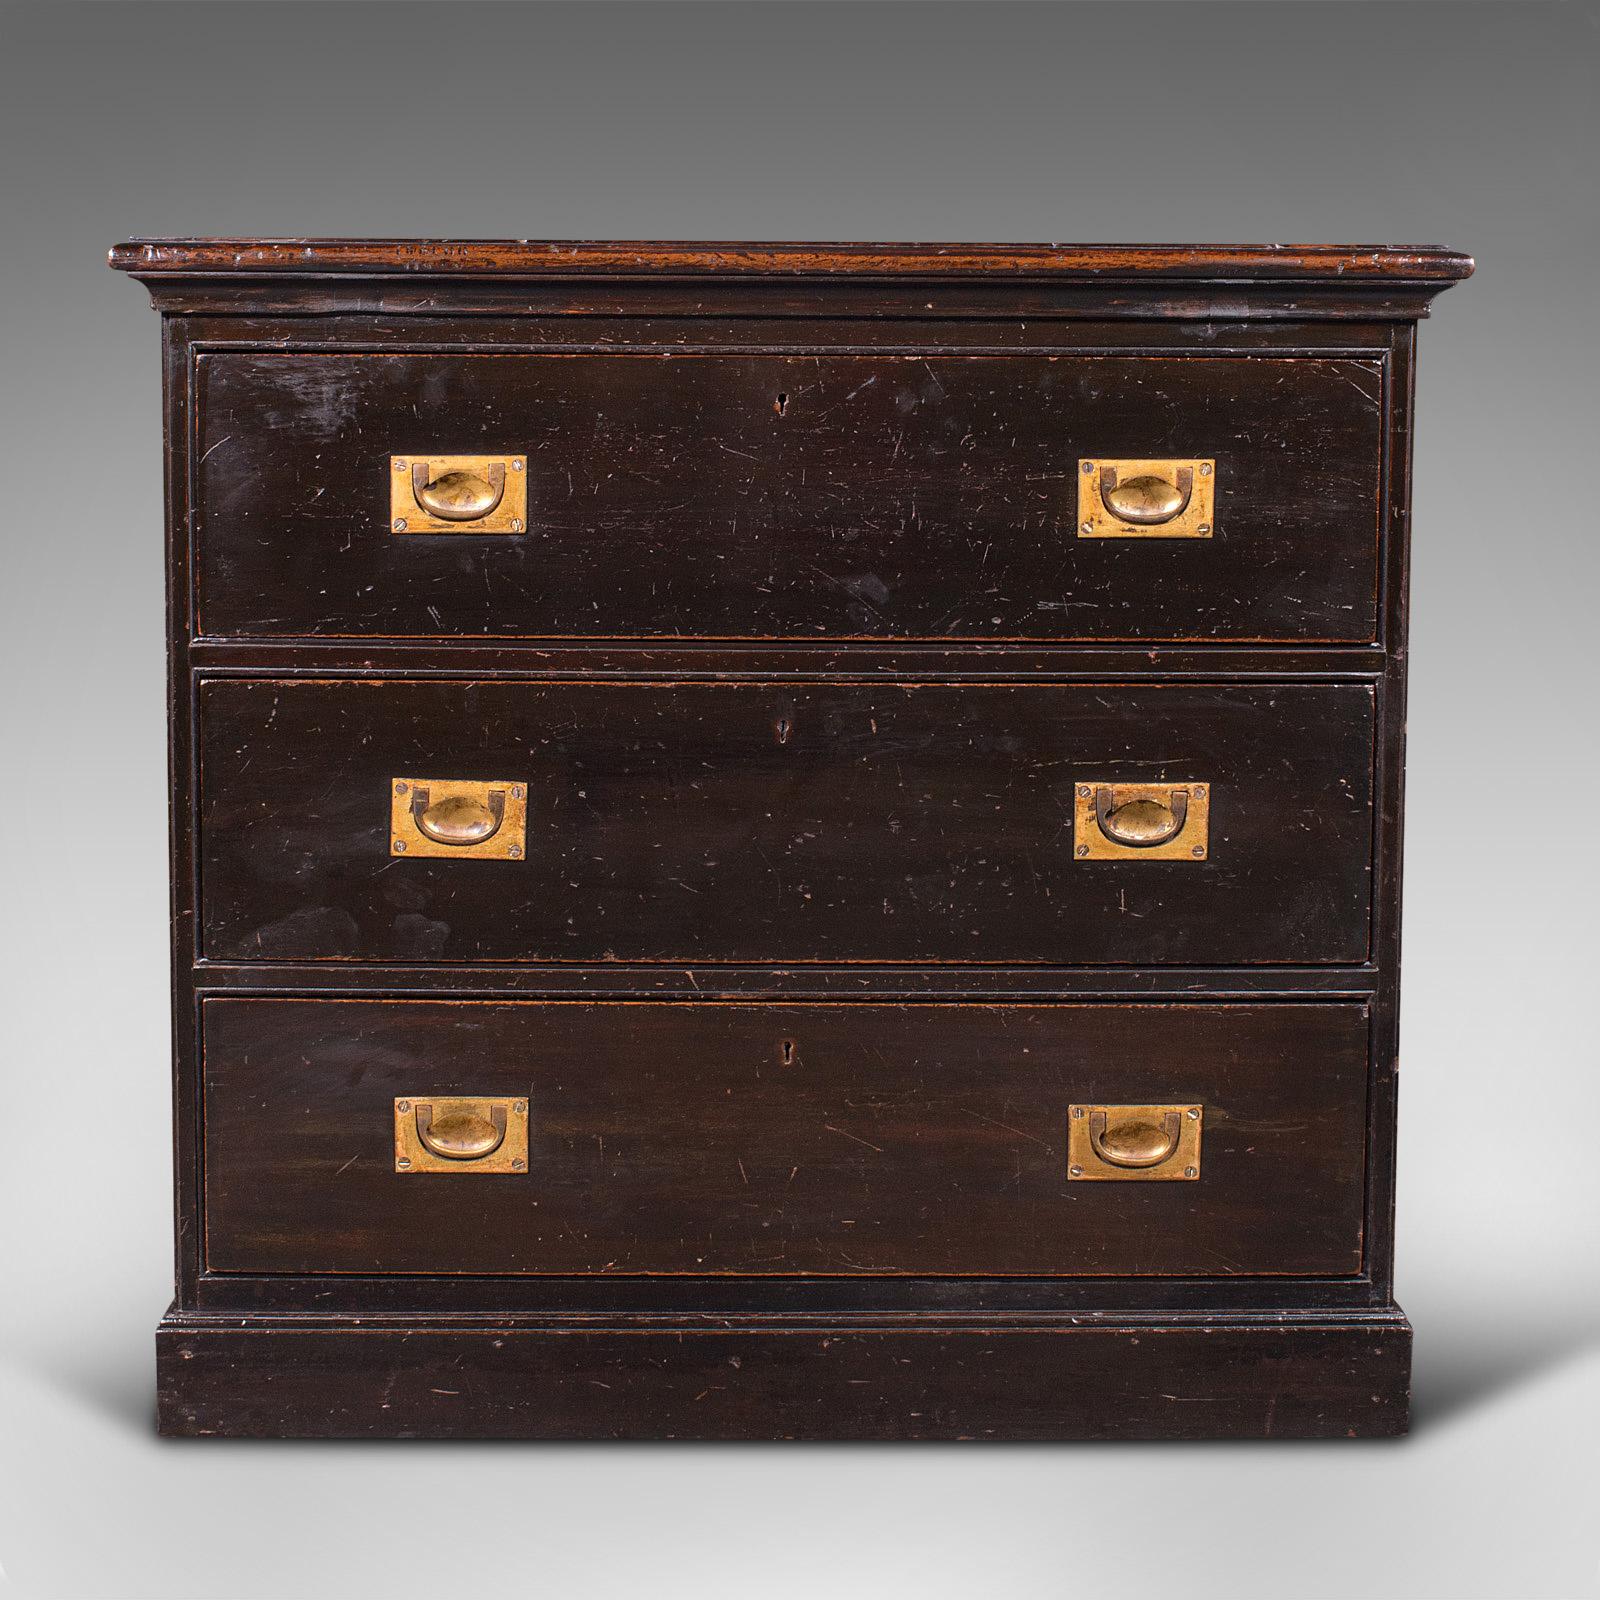 This is an antique campaign chest of drawers. An English, teak lowboy with brass handles, dating to the Victorian period, circa 1880.

Delightfully functional and craftsmanship to stand the test of time
Displays a desirable aged patina